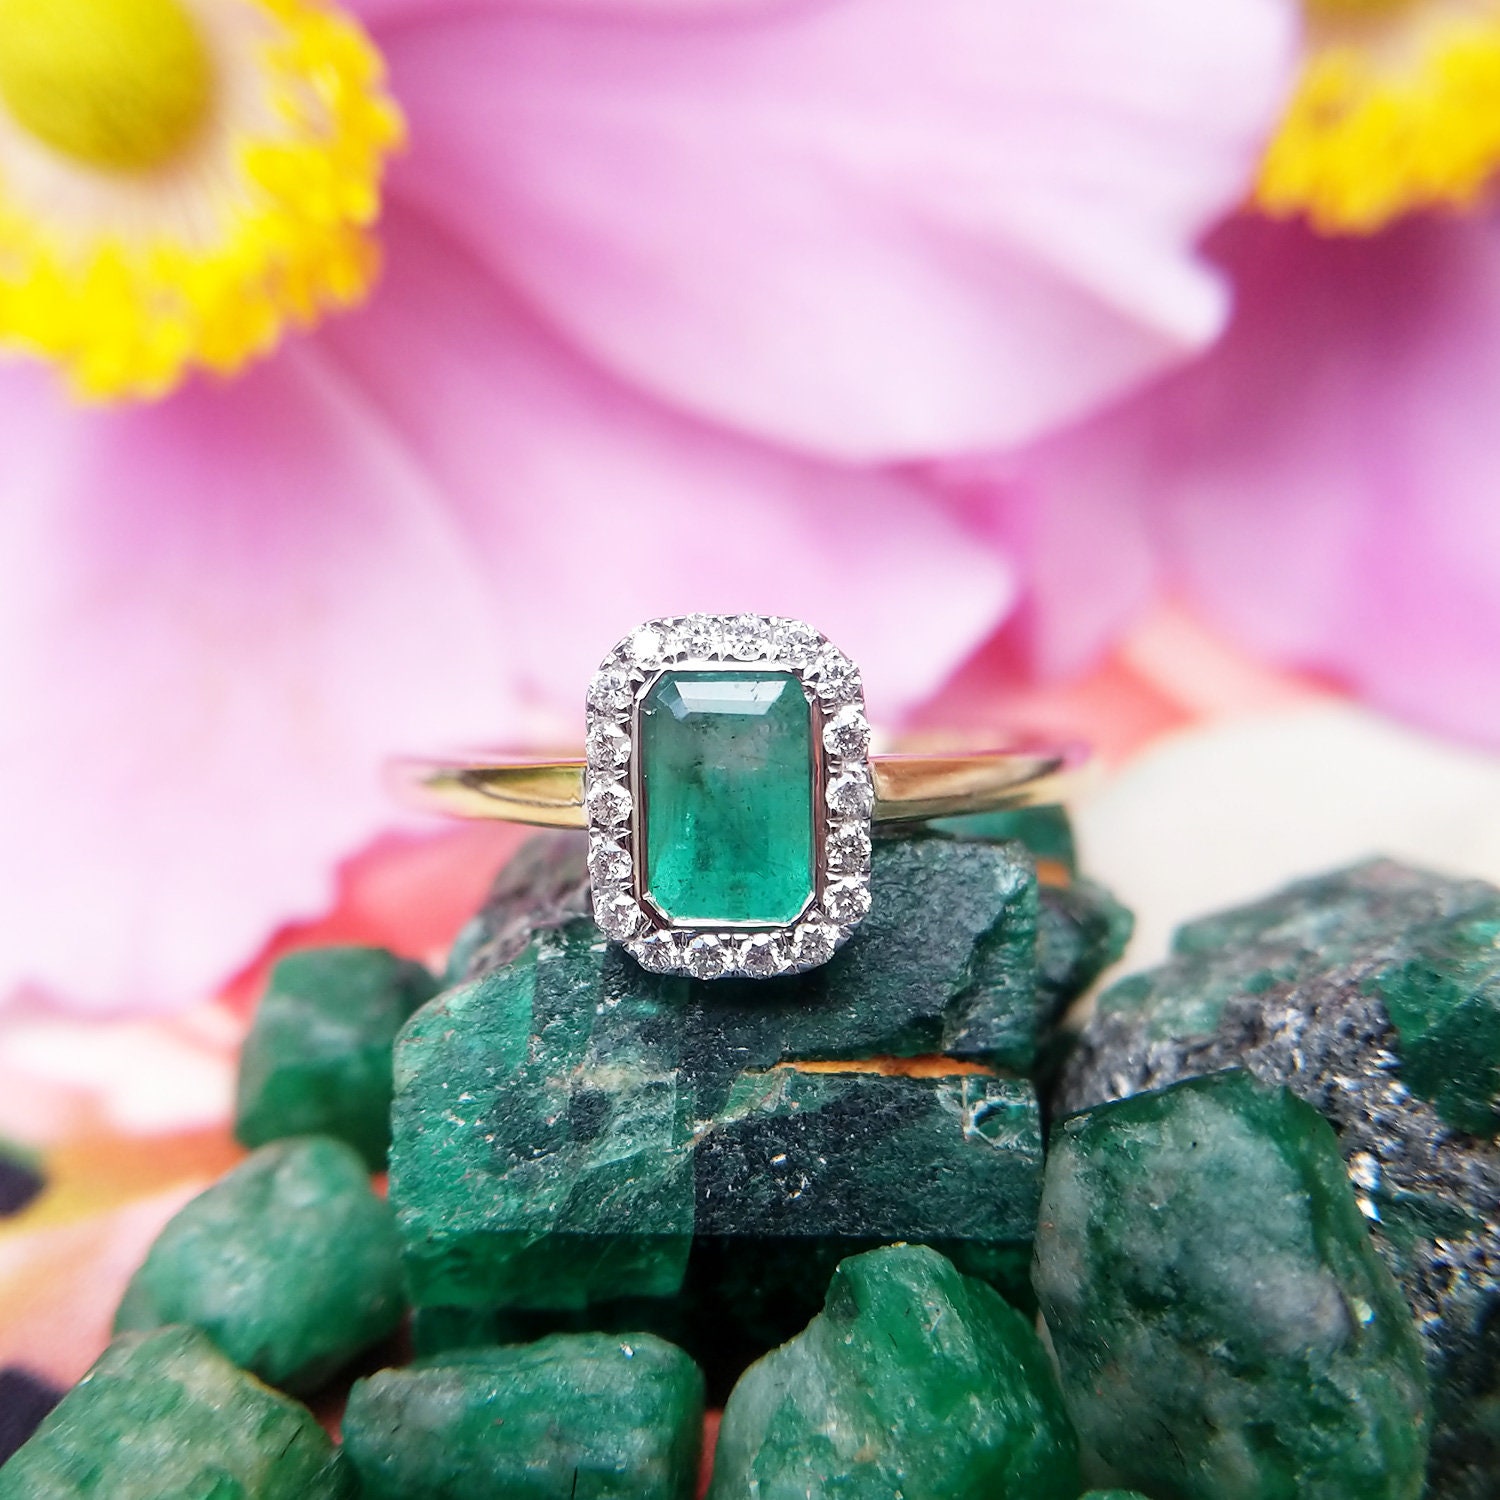 JeenMata 1.75 Carat Rectangle Cut Lab Created Green Emerald Birthstone  Engagement Ring in 18k White Gold over Silver - Walmart.com